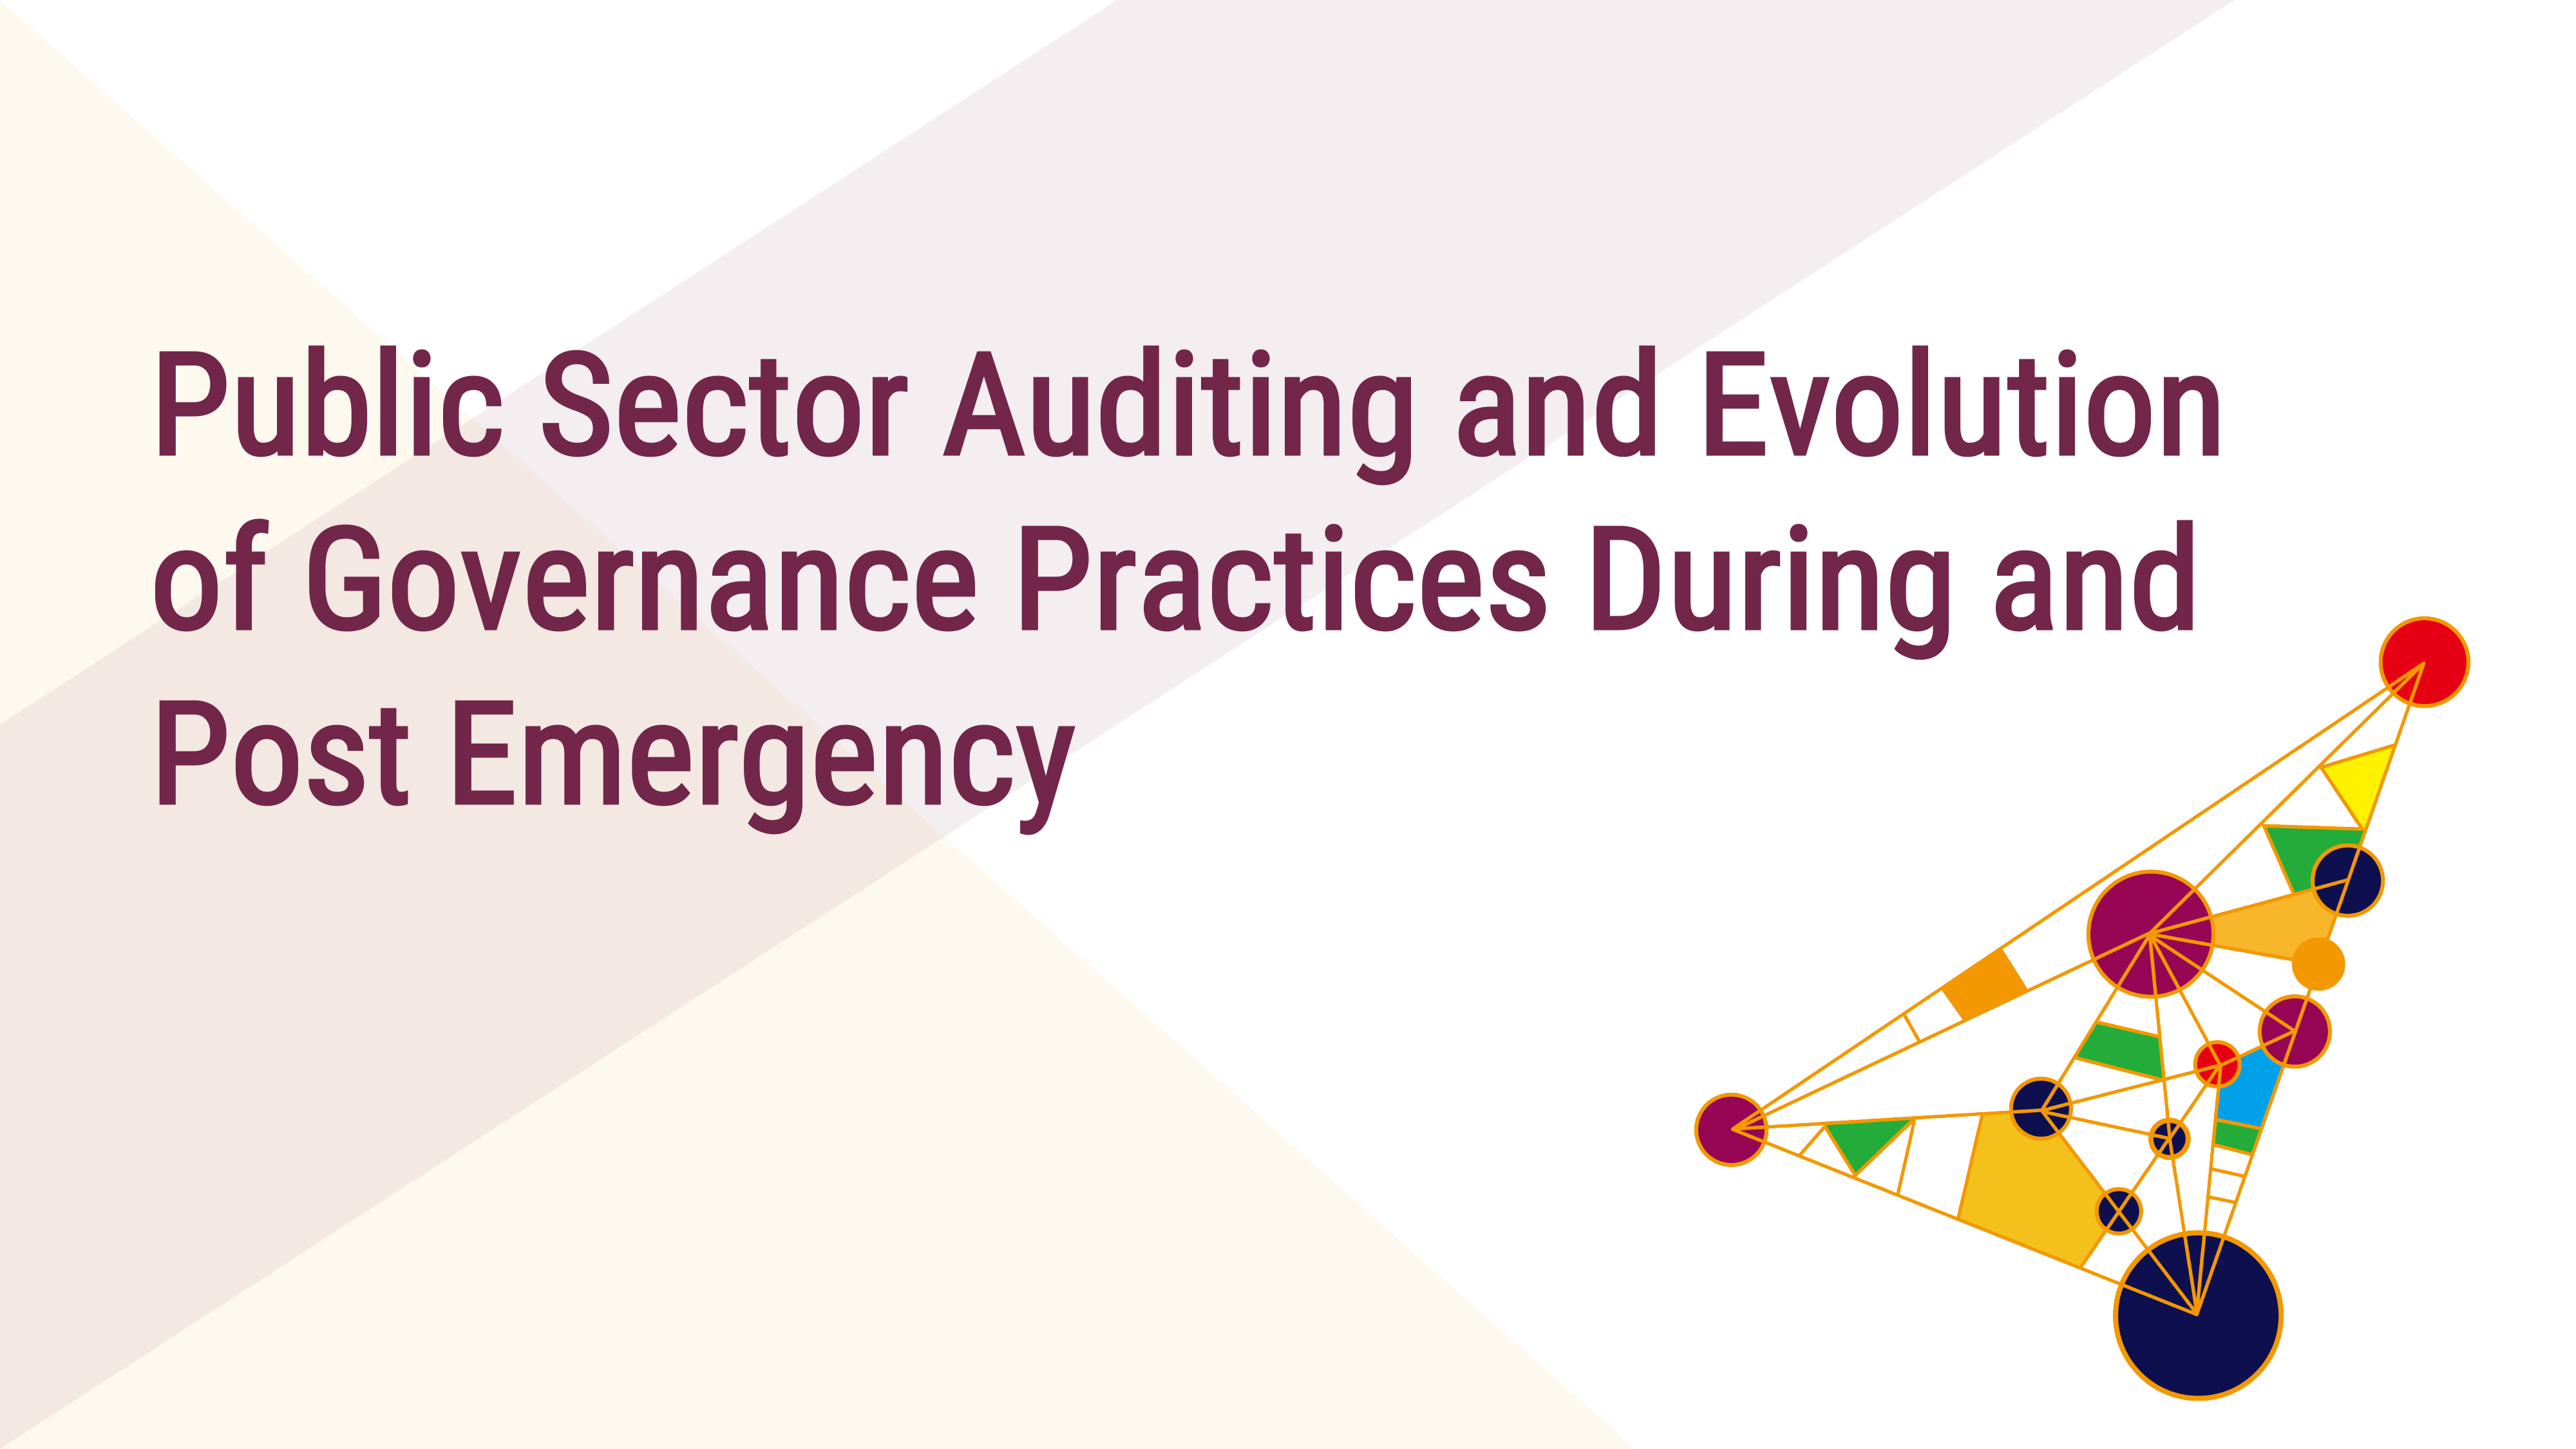 New Course “Public Sector Auditing and Evolution of Governance Practices During and Post Emergency” is Available at U-INTOSAI